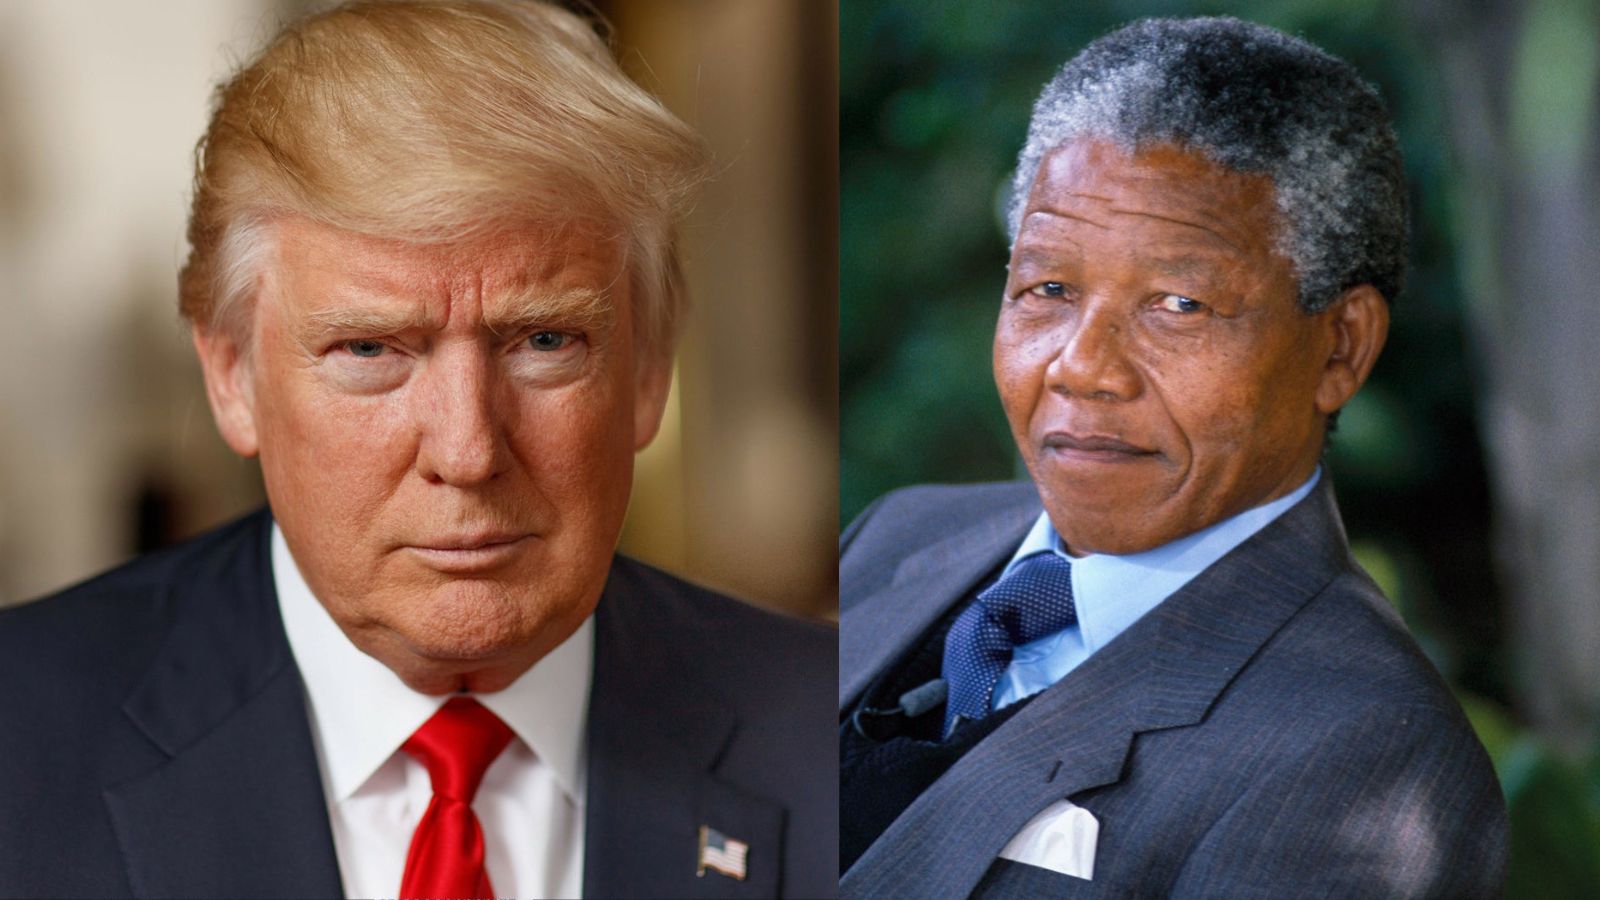 Democrats Just Woke the Sleeping Giant, Proved Who the Real Dictator is, and Turned Trump into “America’s Nelson Mandela”